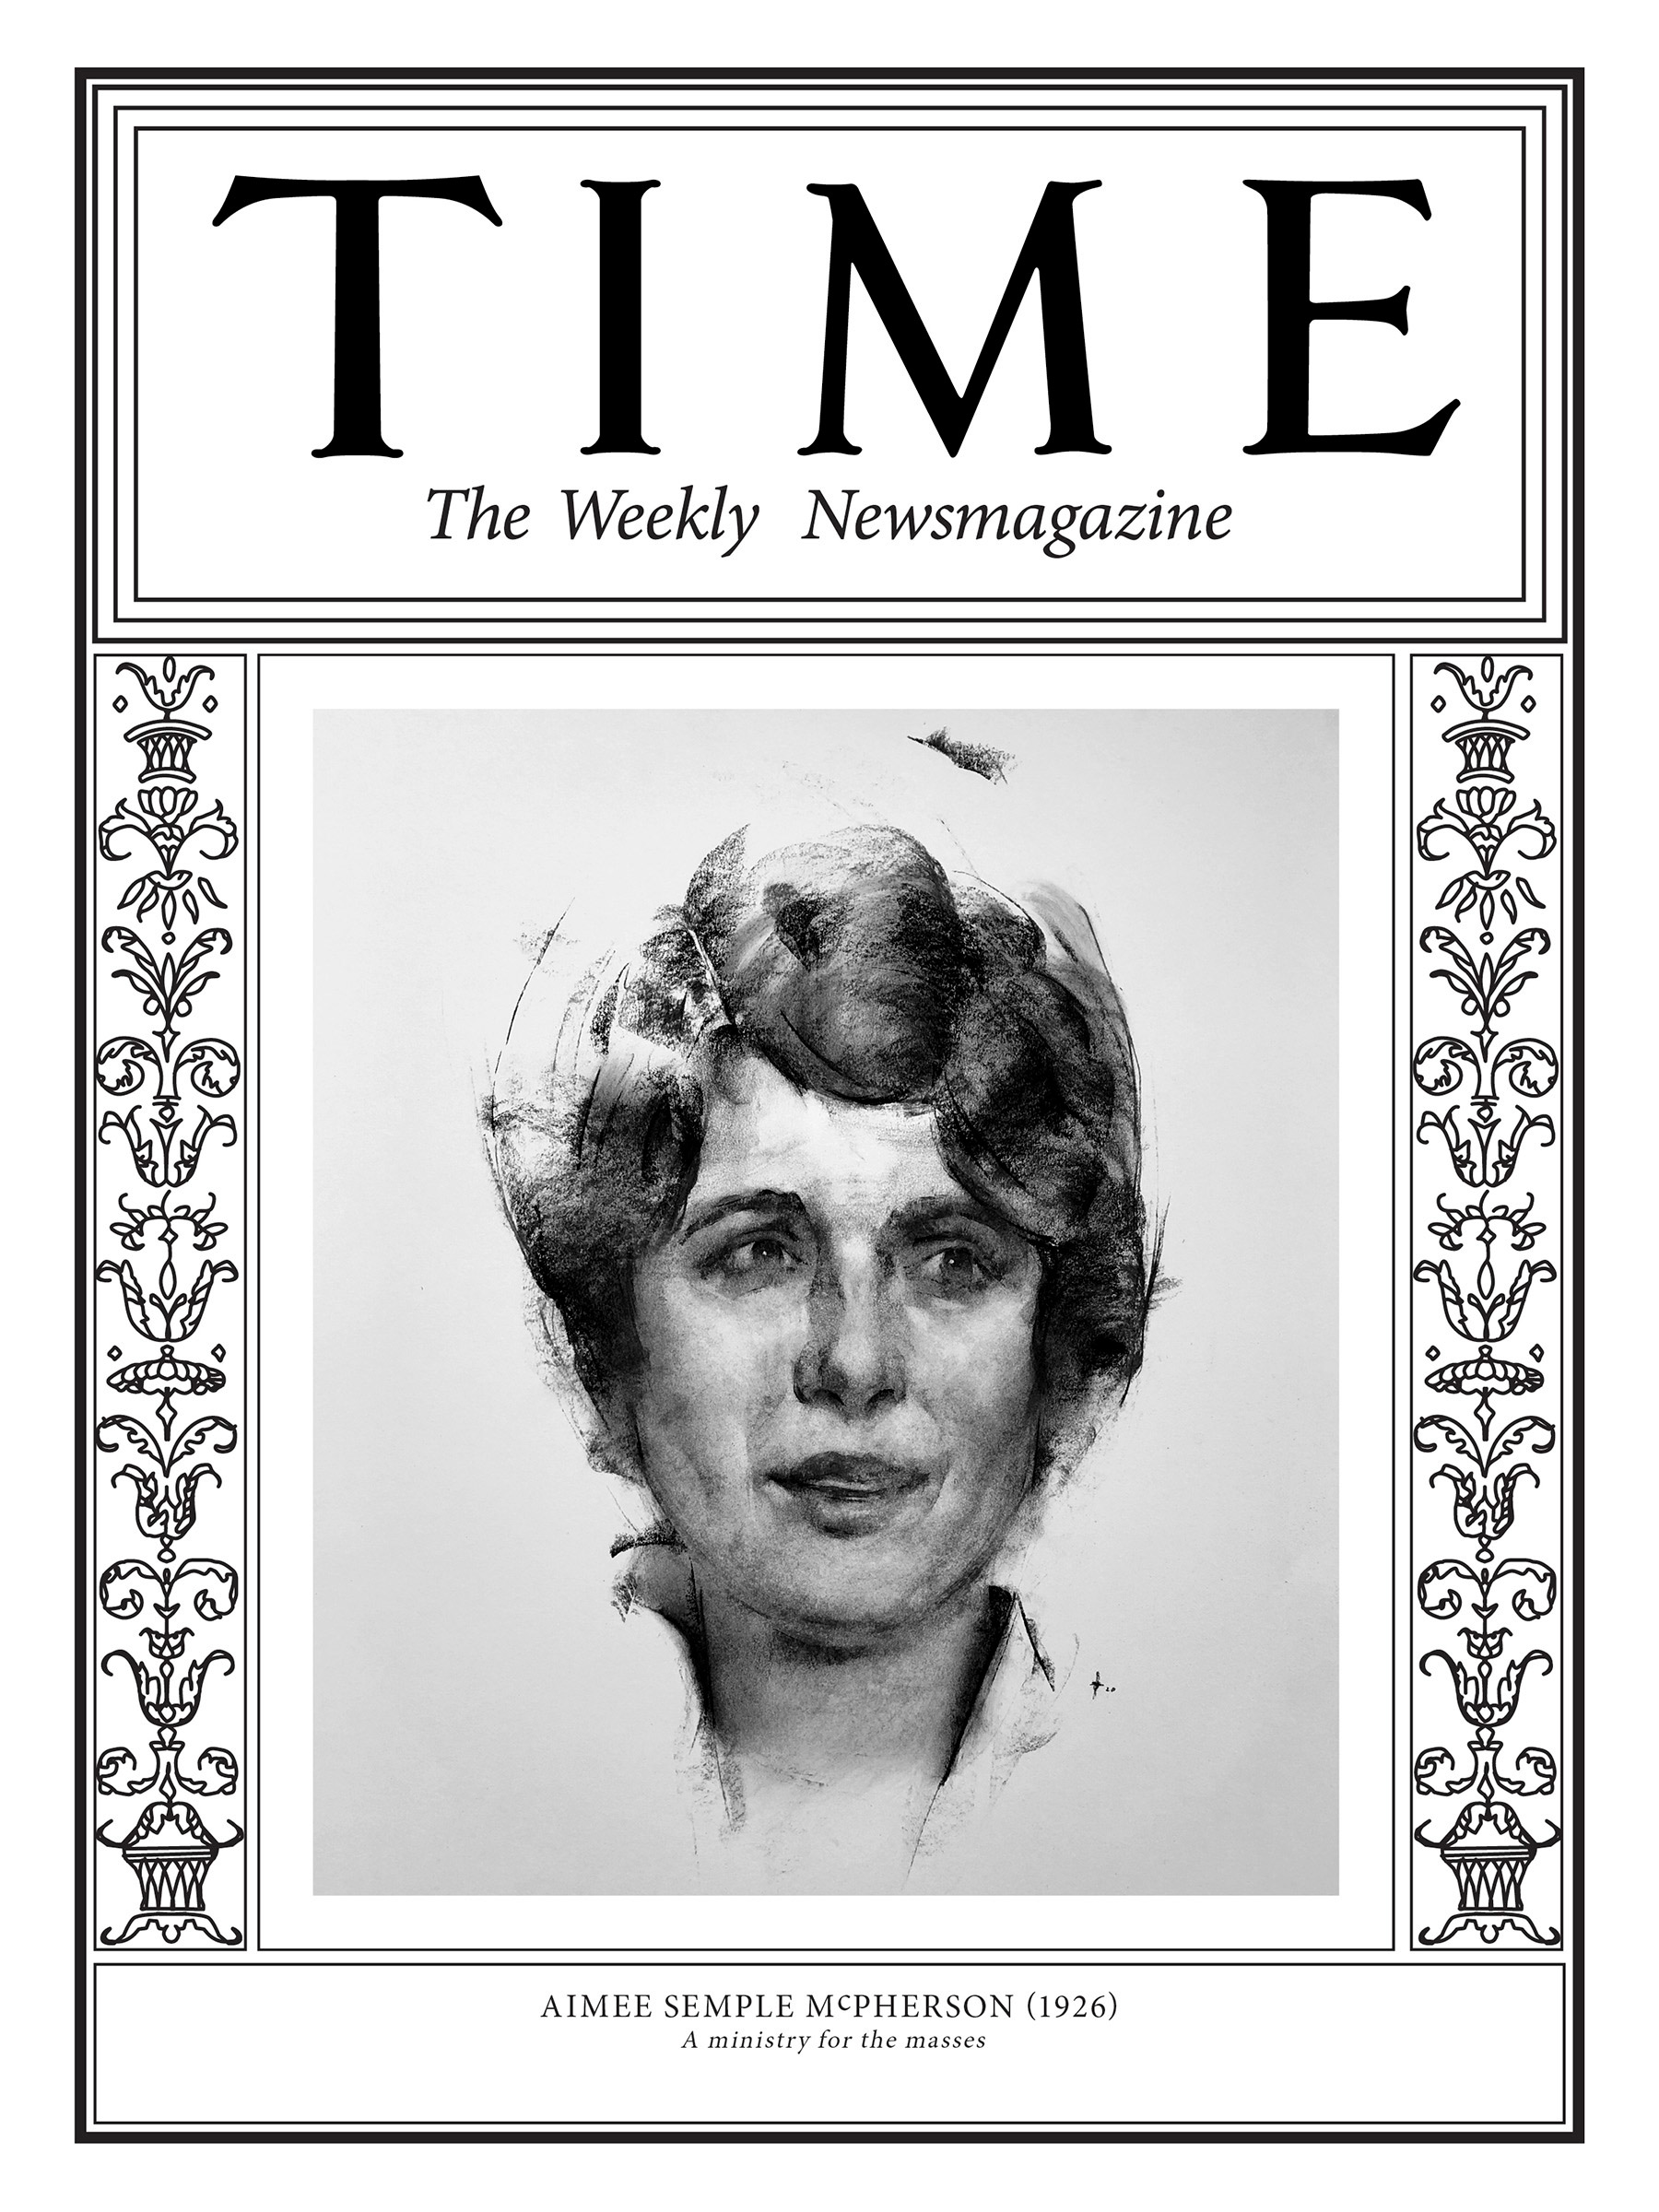 <a href="https://fineartamerica.com/featured/aimee-semple-mcpherson-1926-time.html"><strong>Buy the cover art→</strong></a> (Illustration by George Dawnay for TIME; AP)